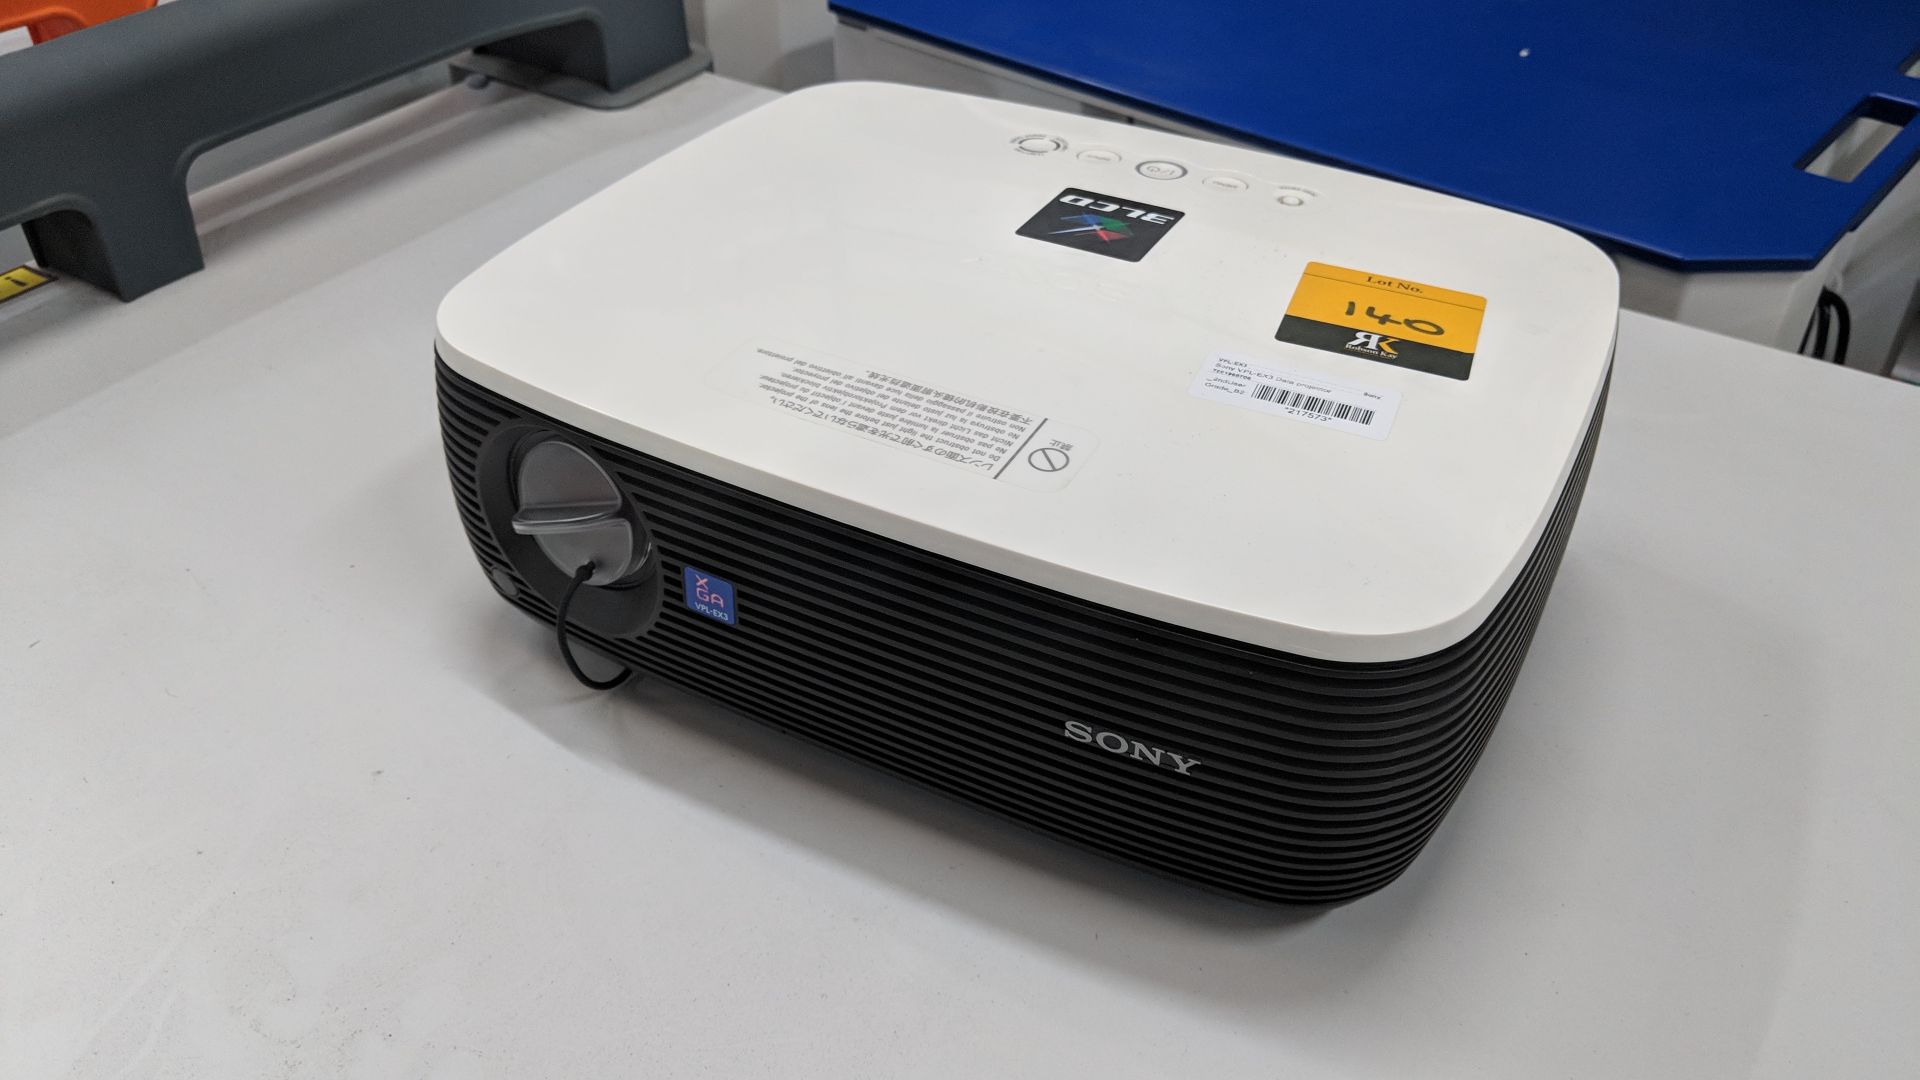 Sony model VPL-EX3 data projector IMPORTANT: Please remember goods successfully bid upon must be